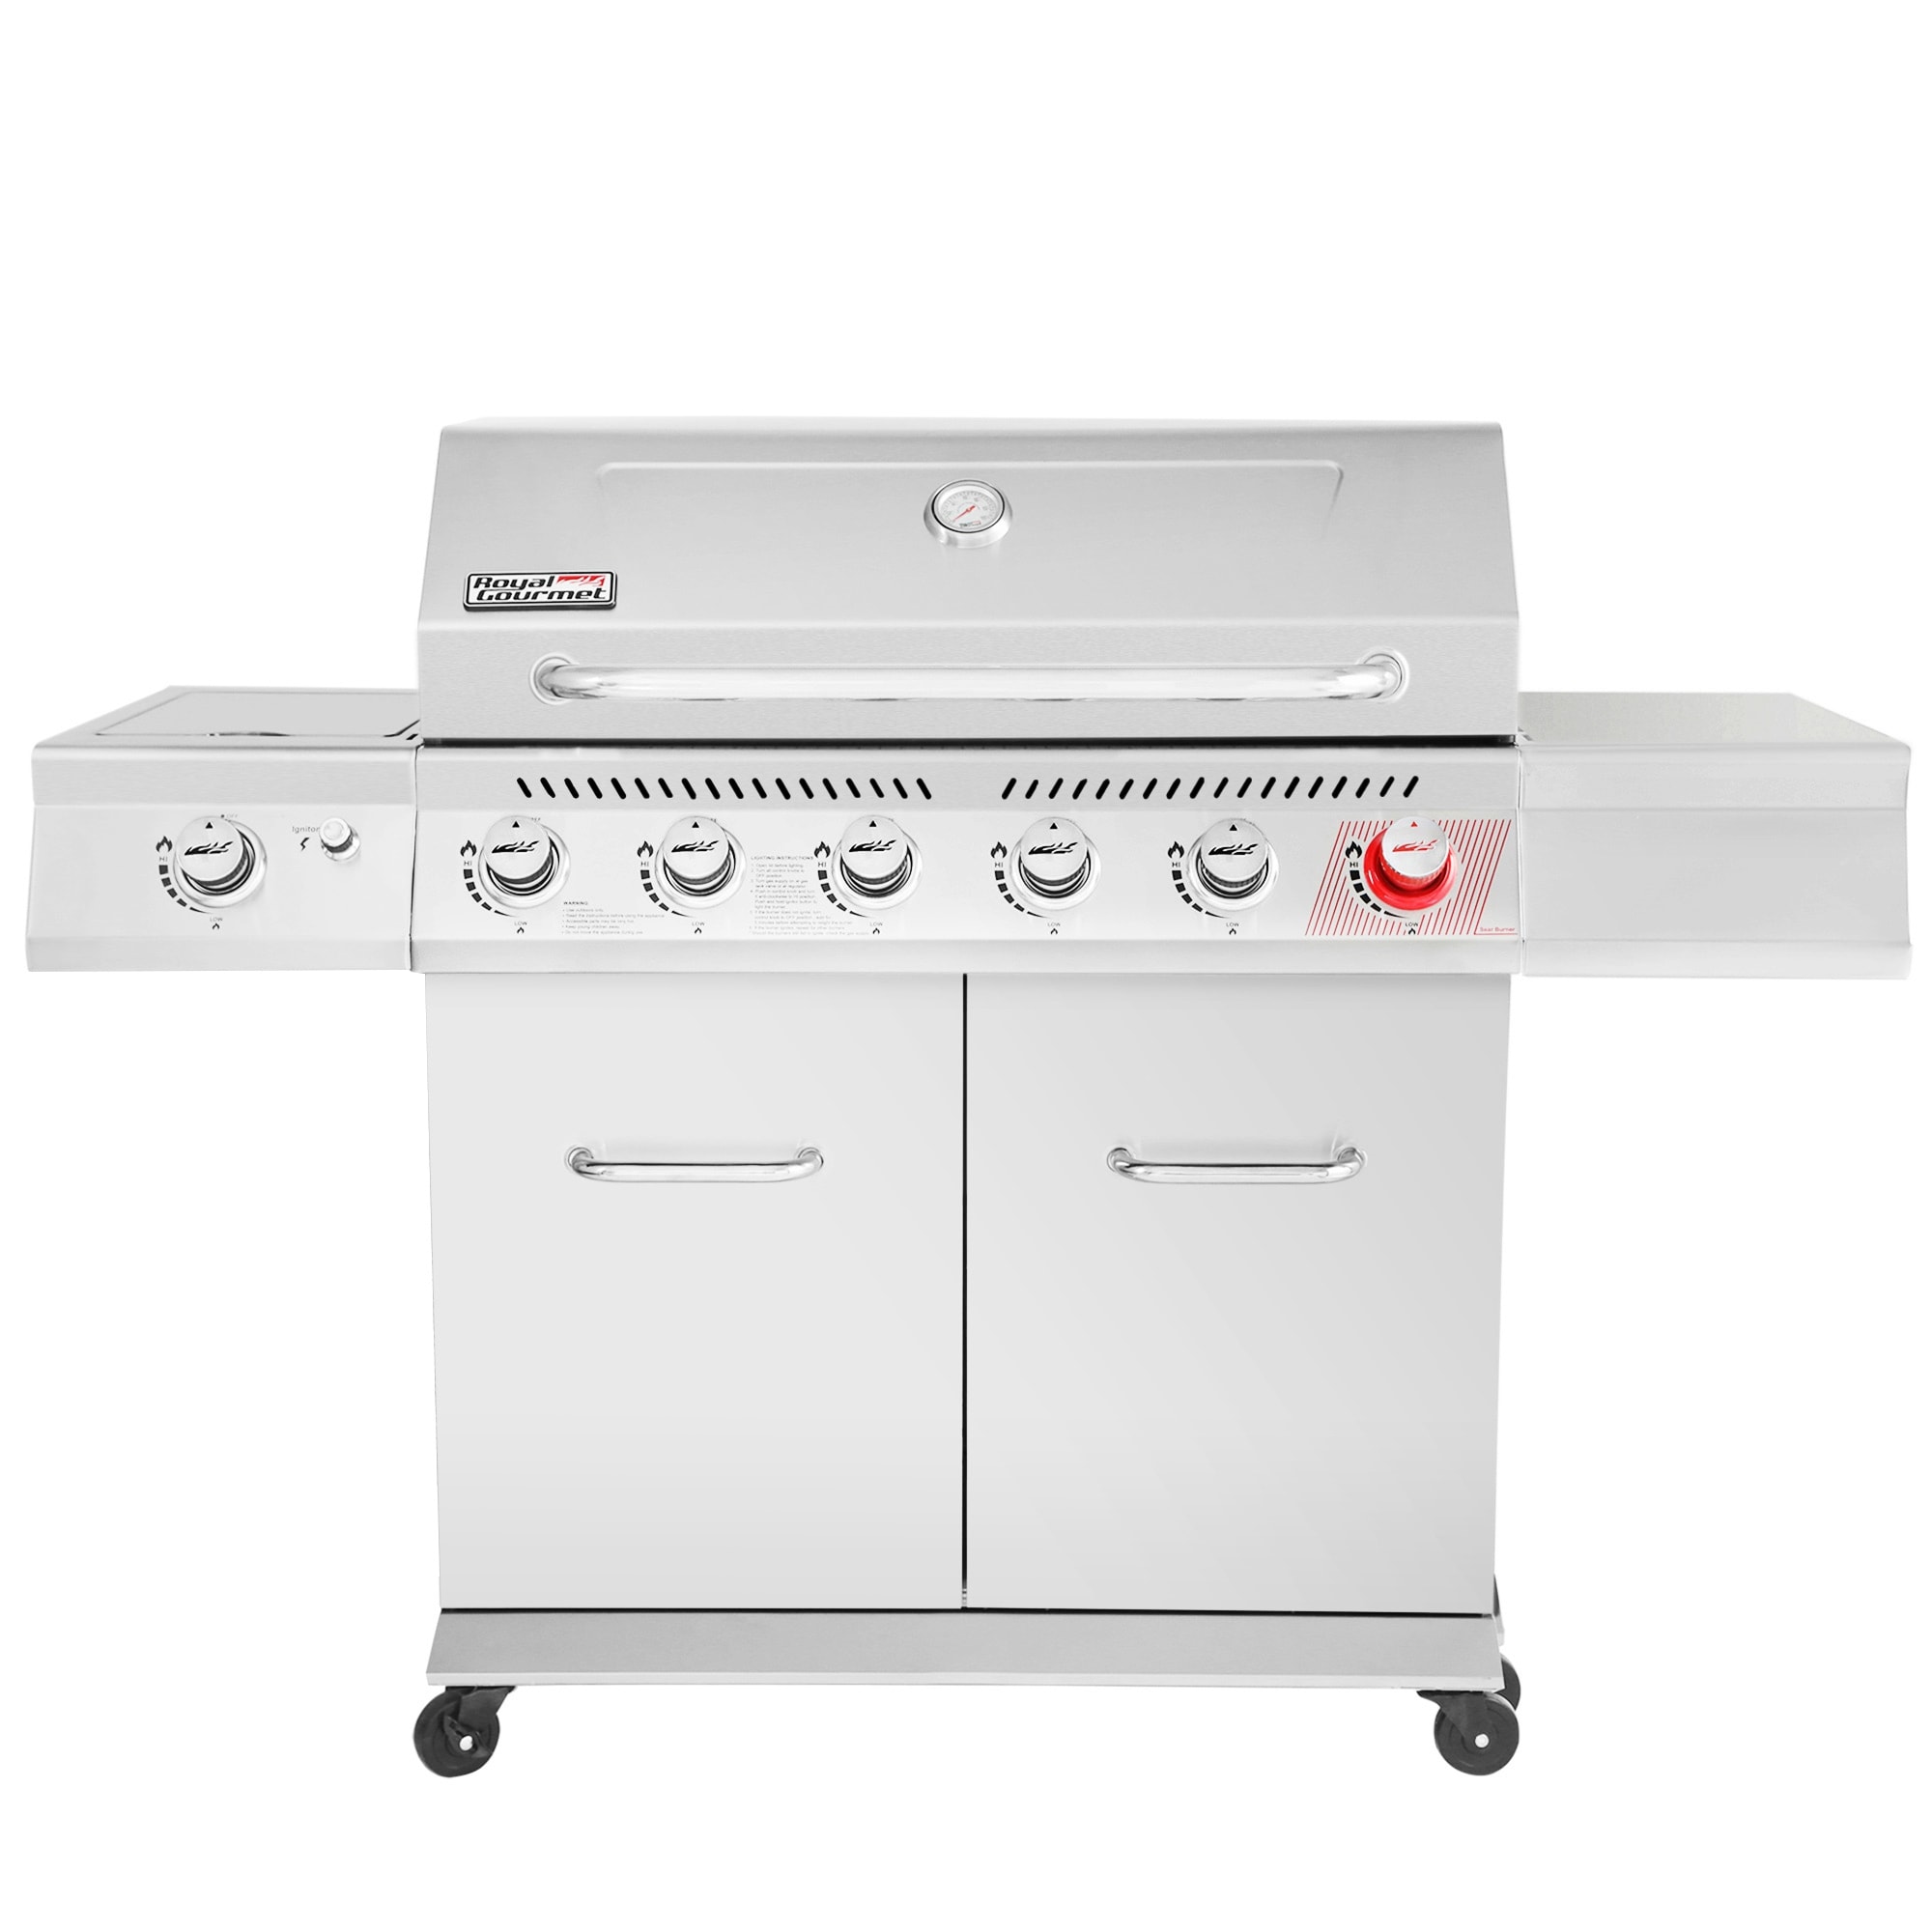 Royal Gourmet Stainless Steel On Side with - Premier Burner - & Burner, Sear Grill Beyond and Bath Grill, 36898562 BBQ - Silver Bed 6-Burner Gas Sale